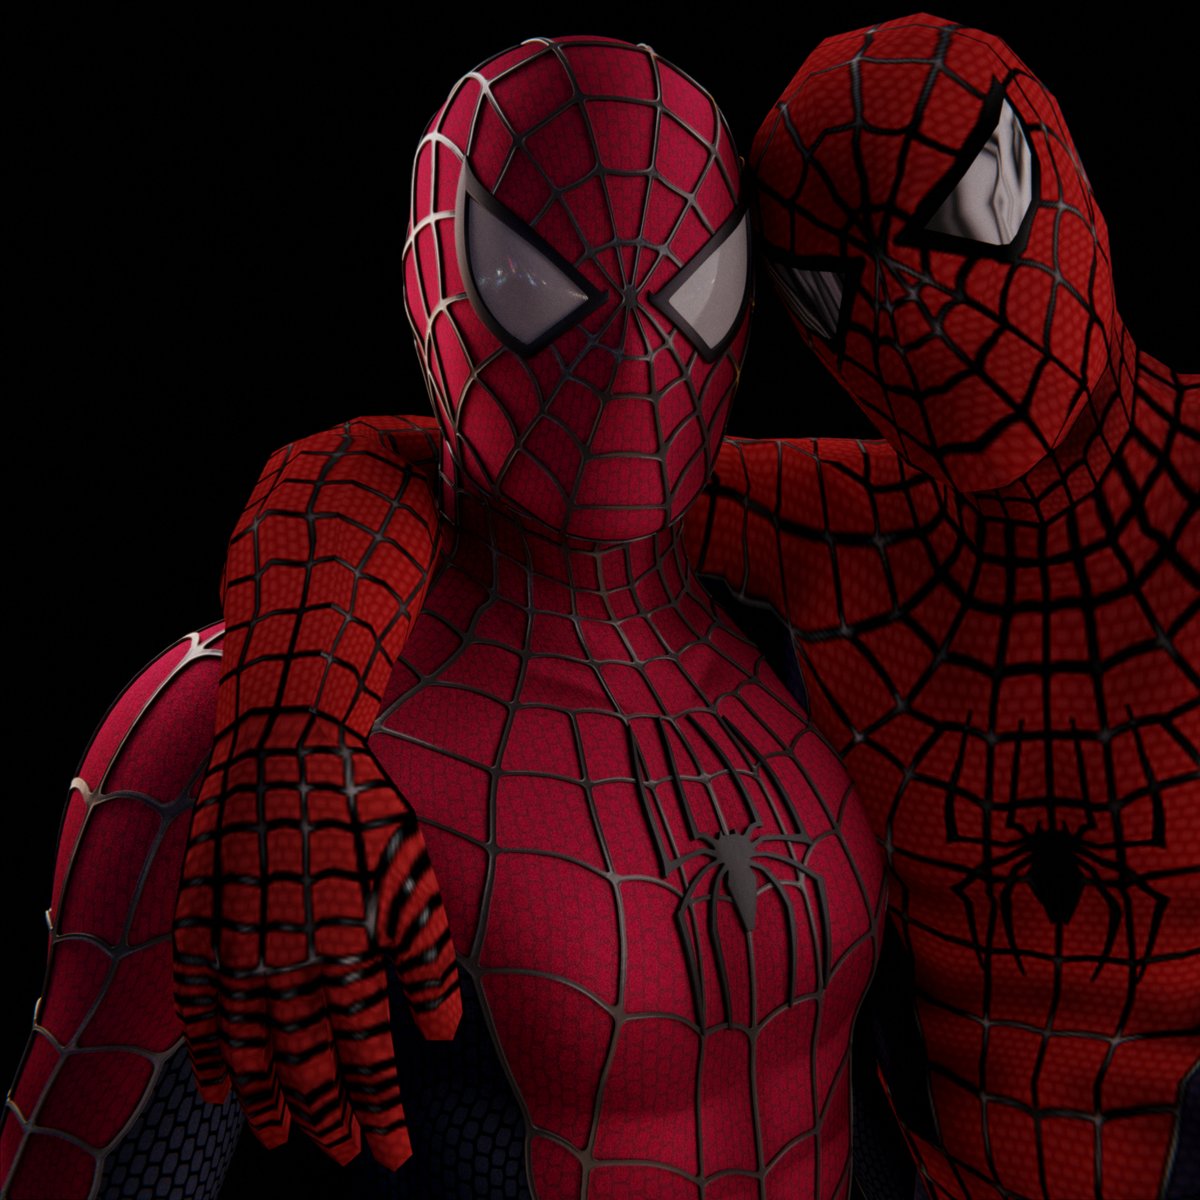 RT @low_res_jpg: 20 years of spider-man graphics https://t.co/XXtgVAjrqI